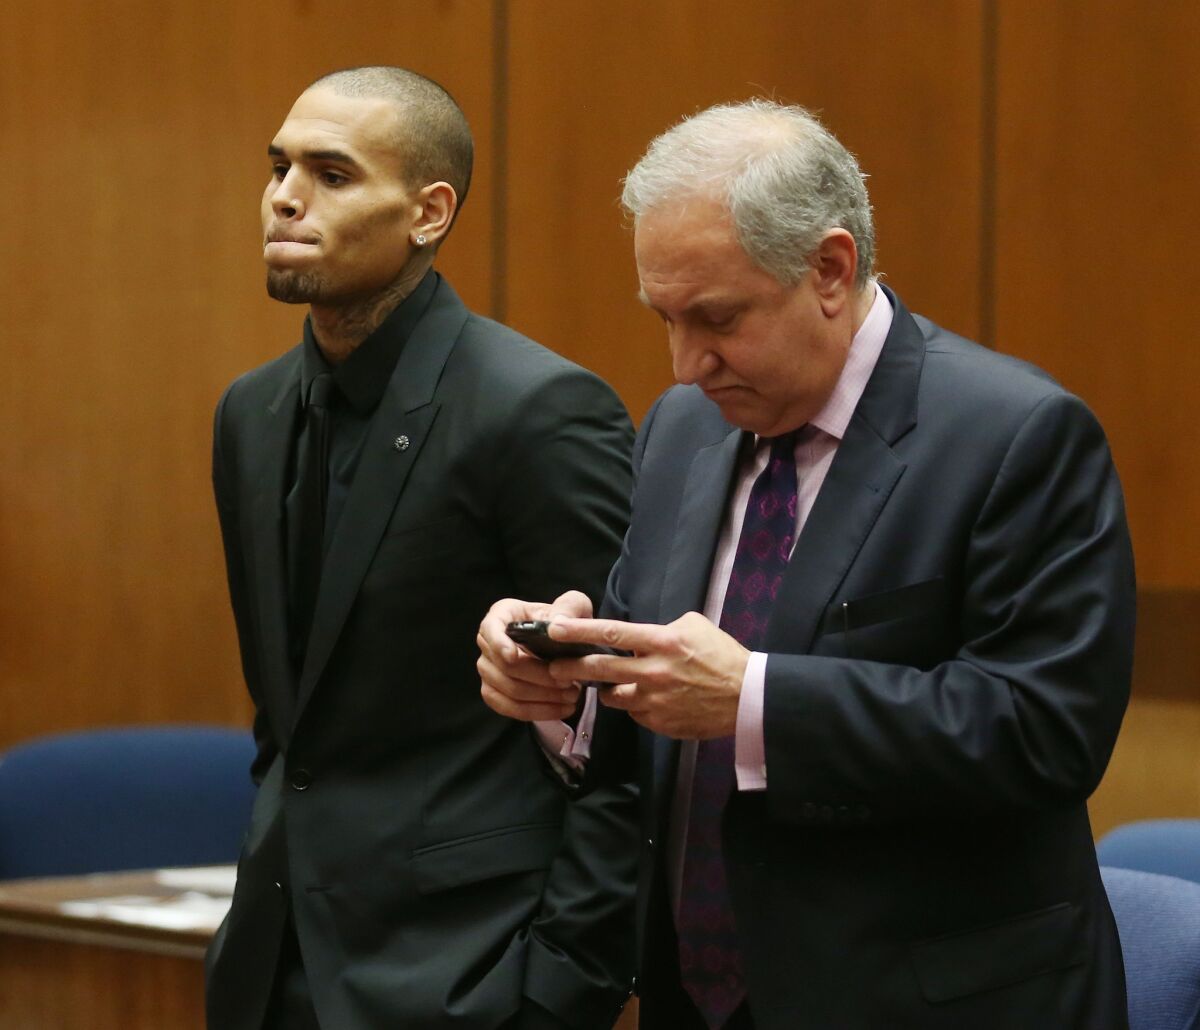 Chris Brown and his attorney, Mark Geragos, appear in court last November. An L.A. County Superior Court judge Monday rebuffed another attempt by prosecutors to send Brown to jail, citing his progress in therapy.